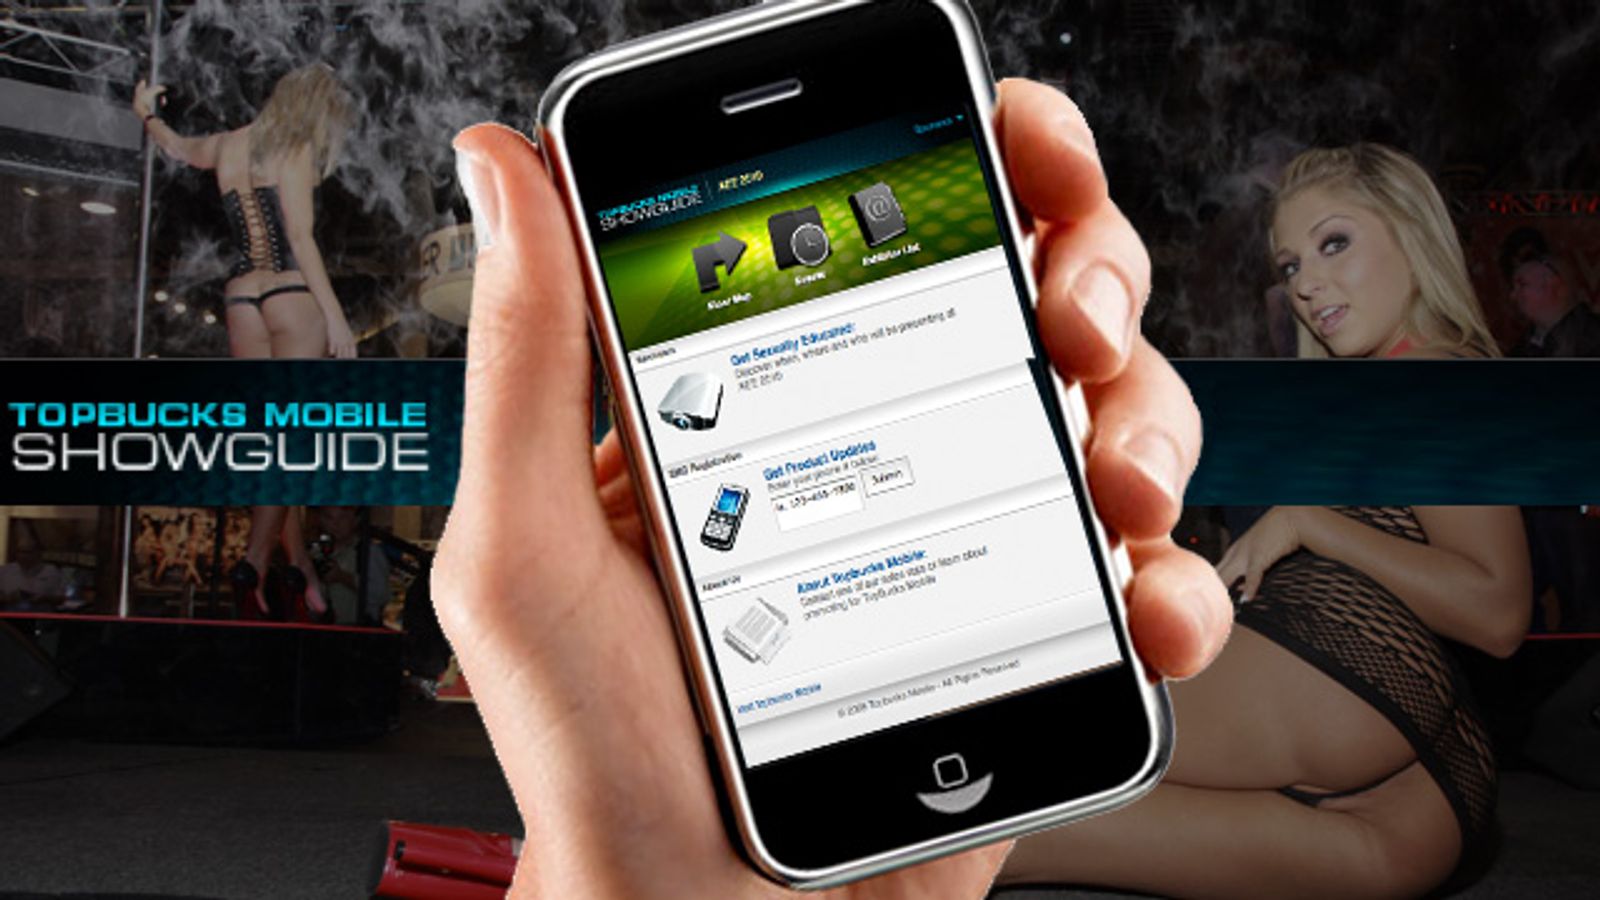 TopBucks Mobile Launches Mobile Show Guide for AEE